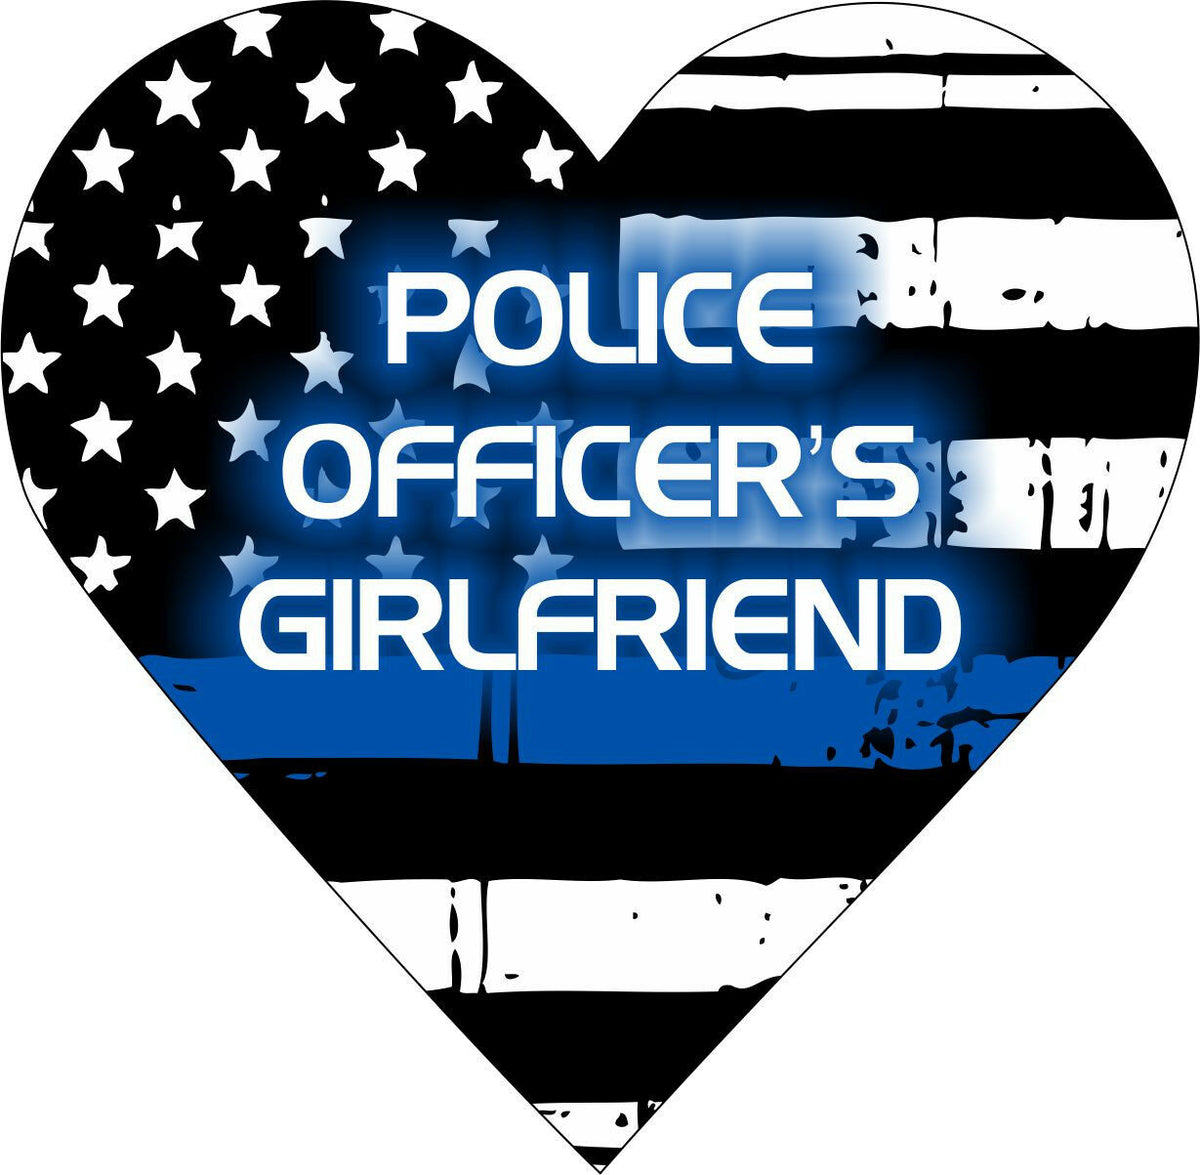 Thin blue line decal - Police officer's girlfriend heart decal - various sizes - Powercall Sirens LLC